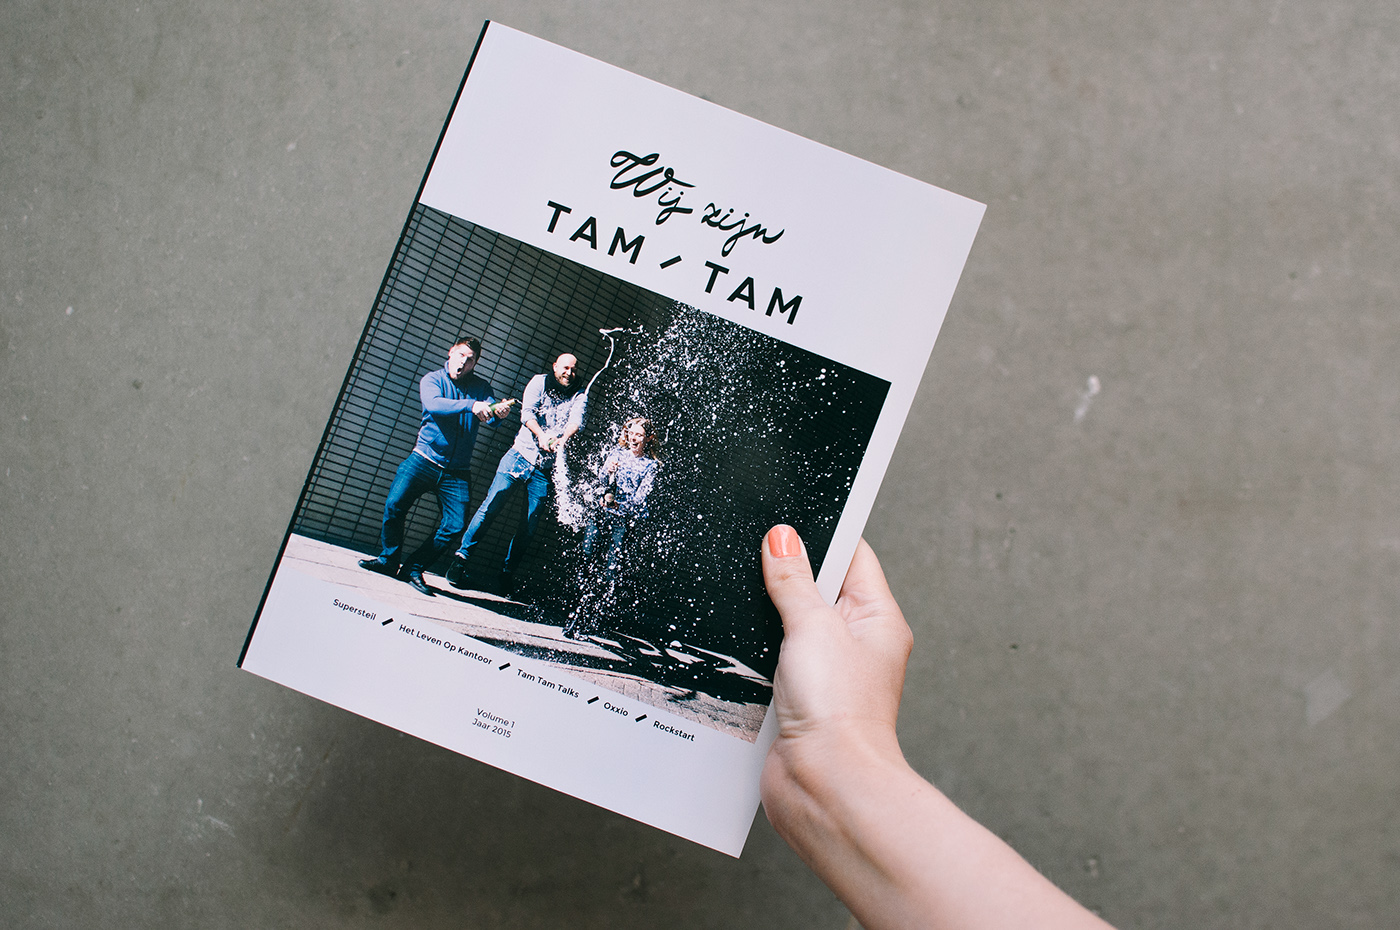 Tam Tam magazine dutch Netherlands full service digital agency Table of Content cover editorial design digital app mobile page spread